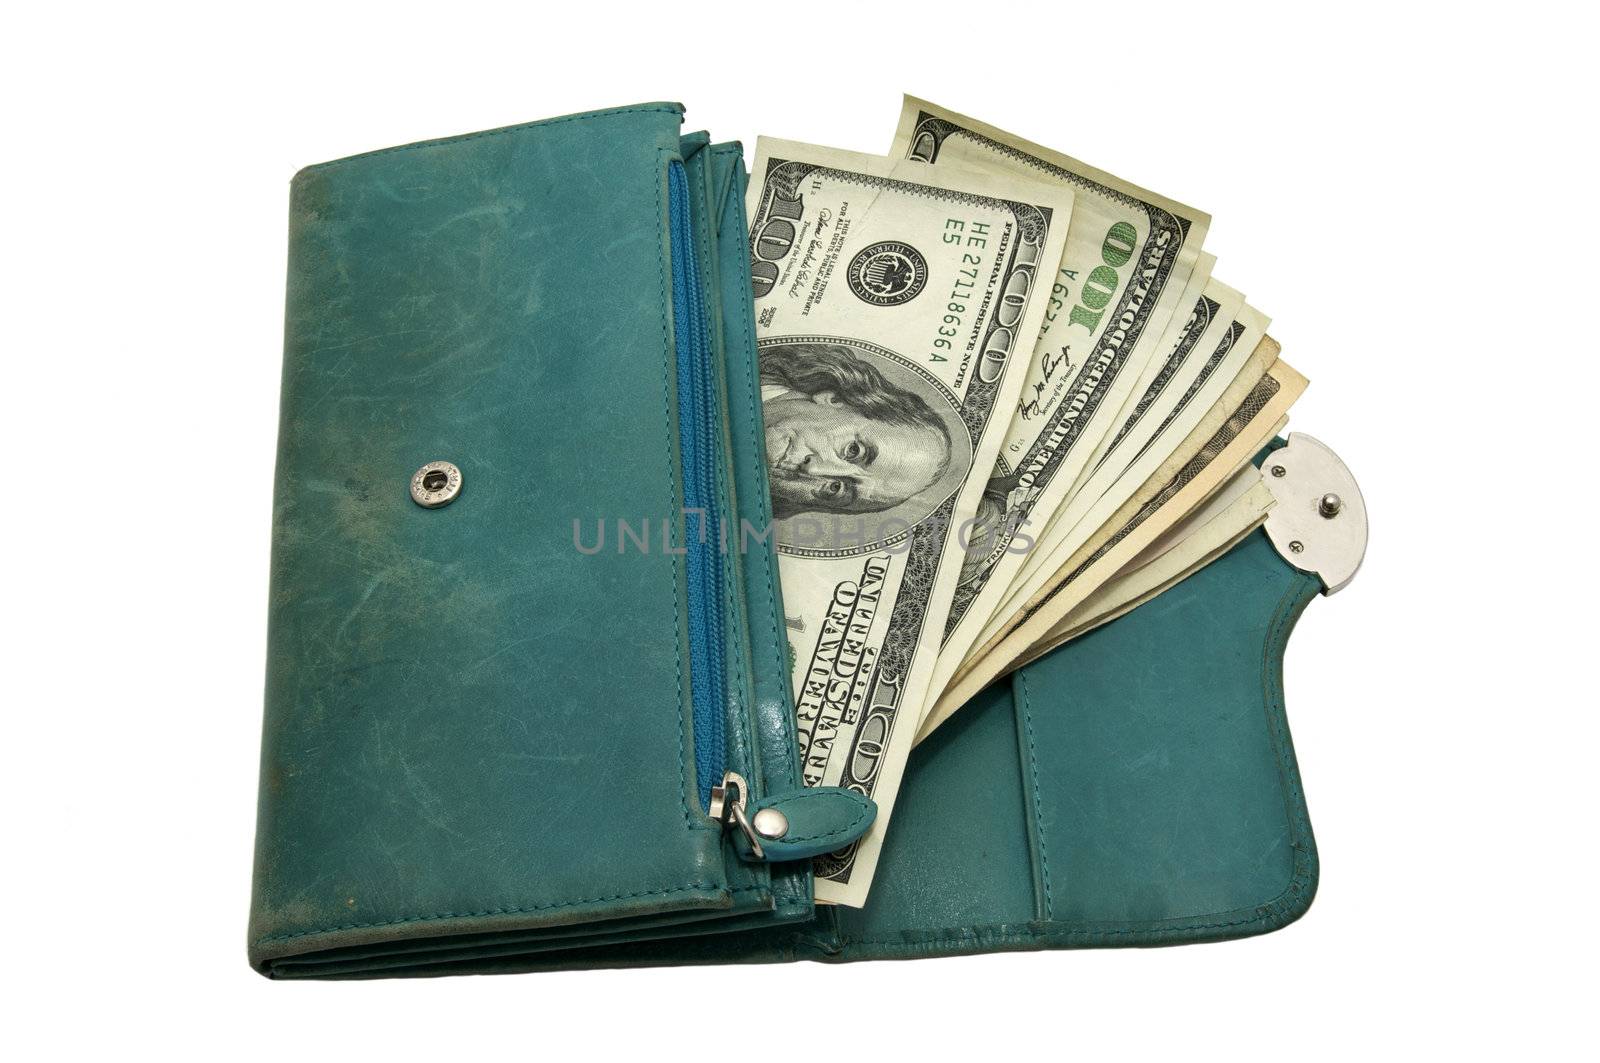 Women's wallet is opened with the money